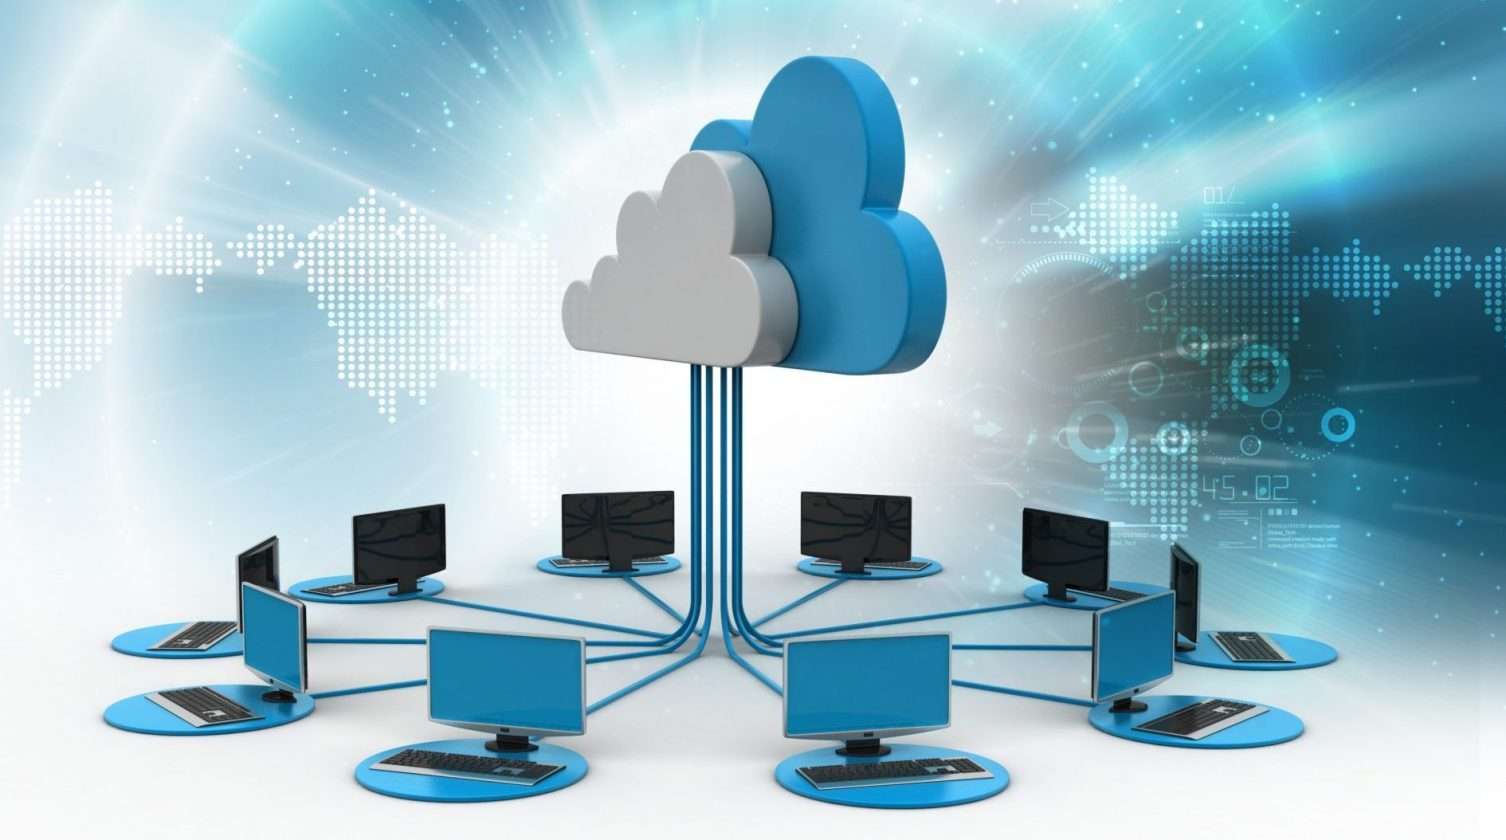 What Is Meant By Backing Up Files Through Cloud Computing